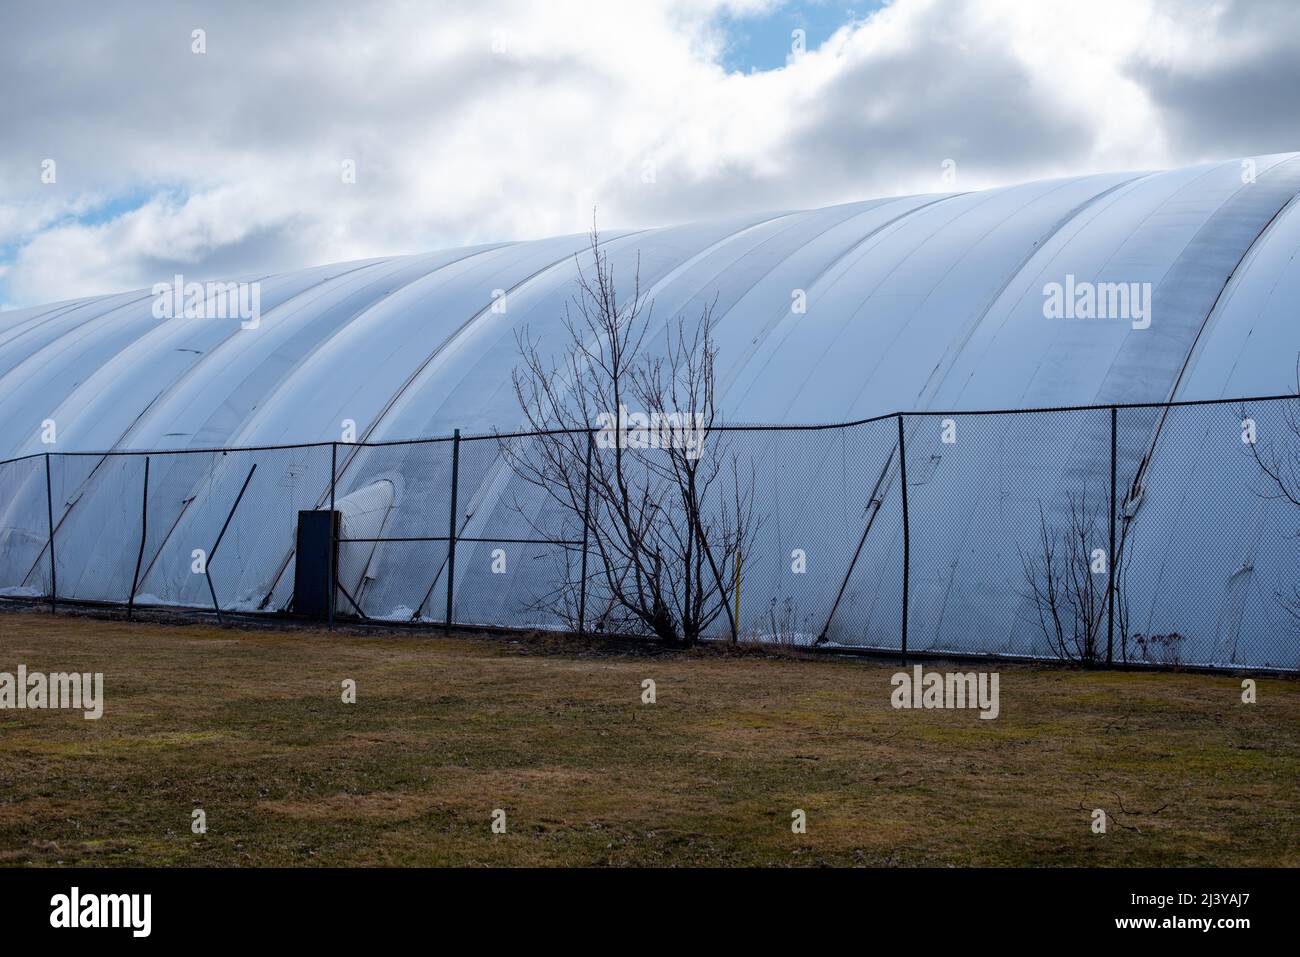 The exterior of a white semi permanent indoor tennis court dome tent. The polythene symmetrical pattern of the prefabricated pressurized air bubble Stock Photo